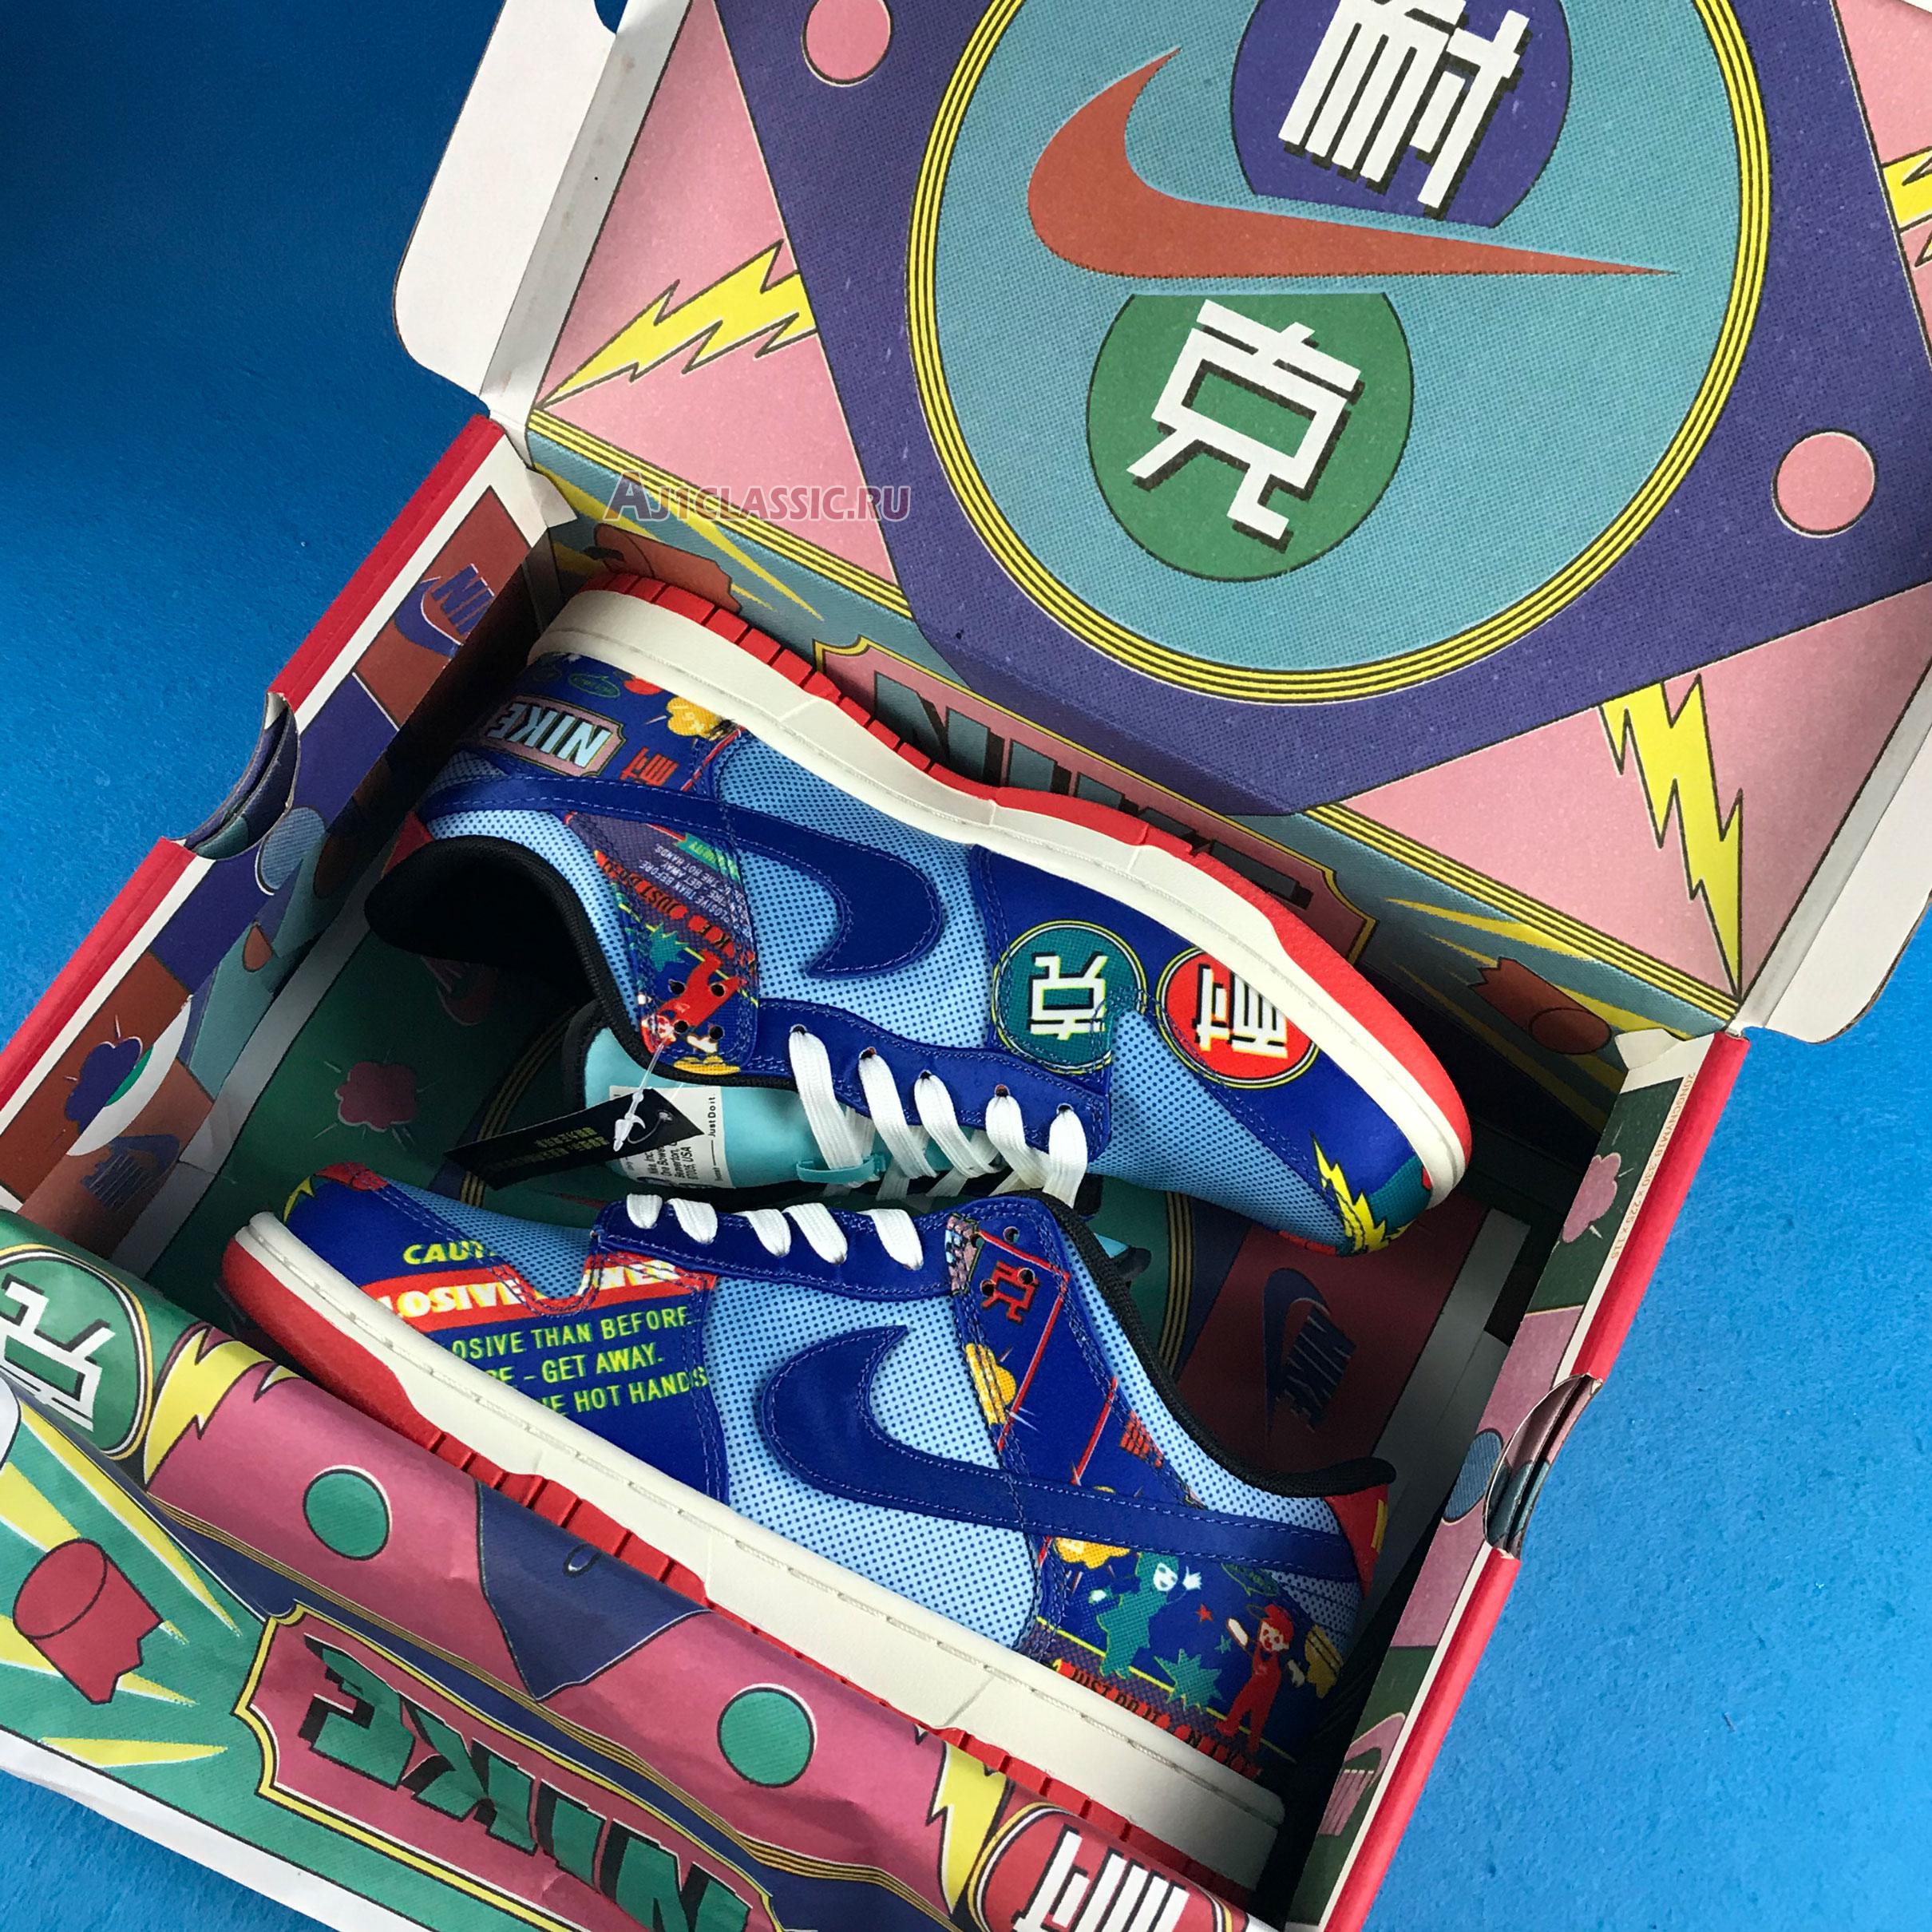 Nike Dunk Low Chinese New Year - Firecracker DD8477-446 Copa/Hyper Blue/Chile Red/Sail Sneakers